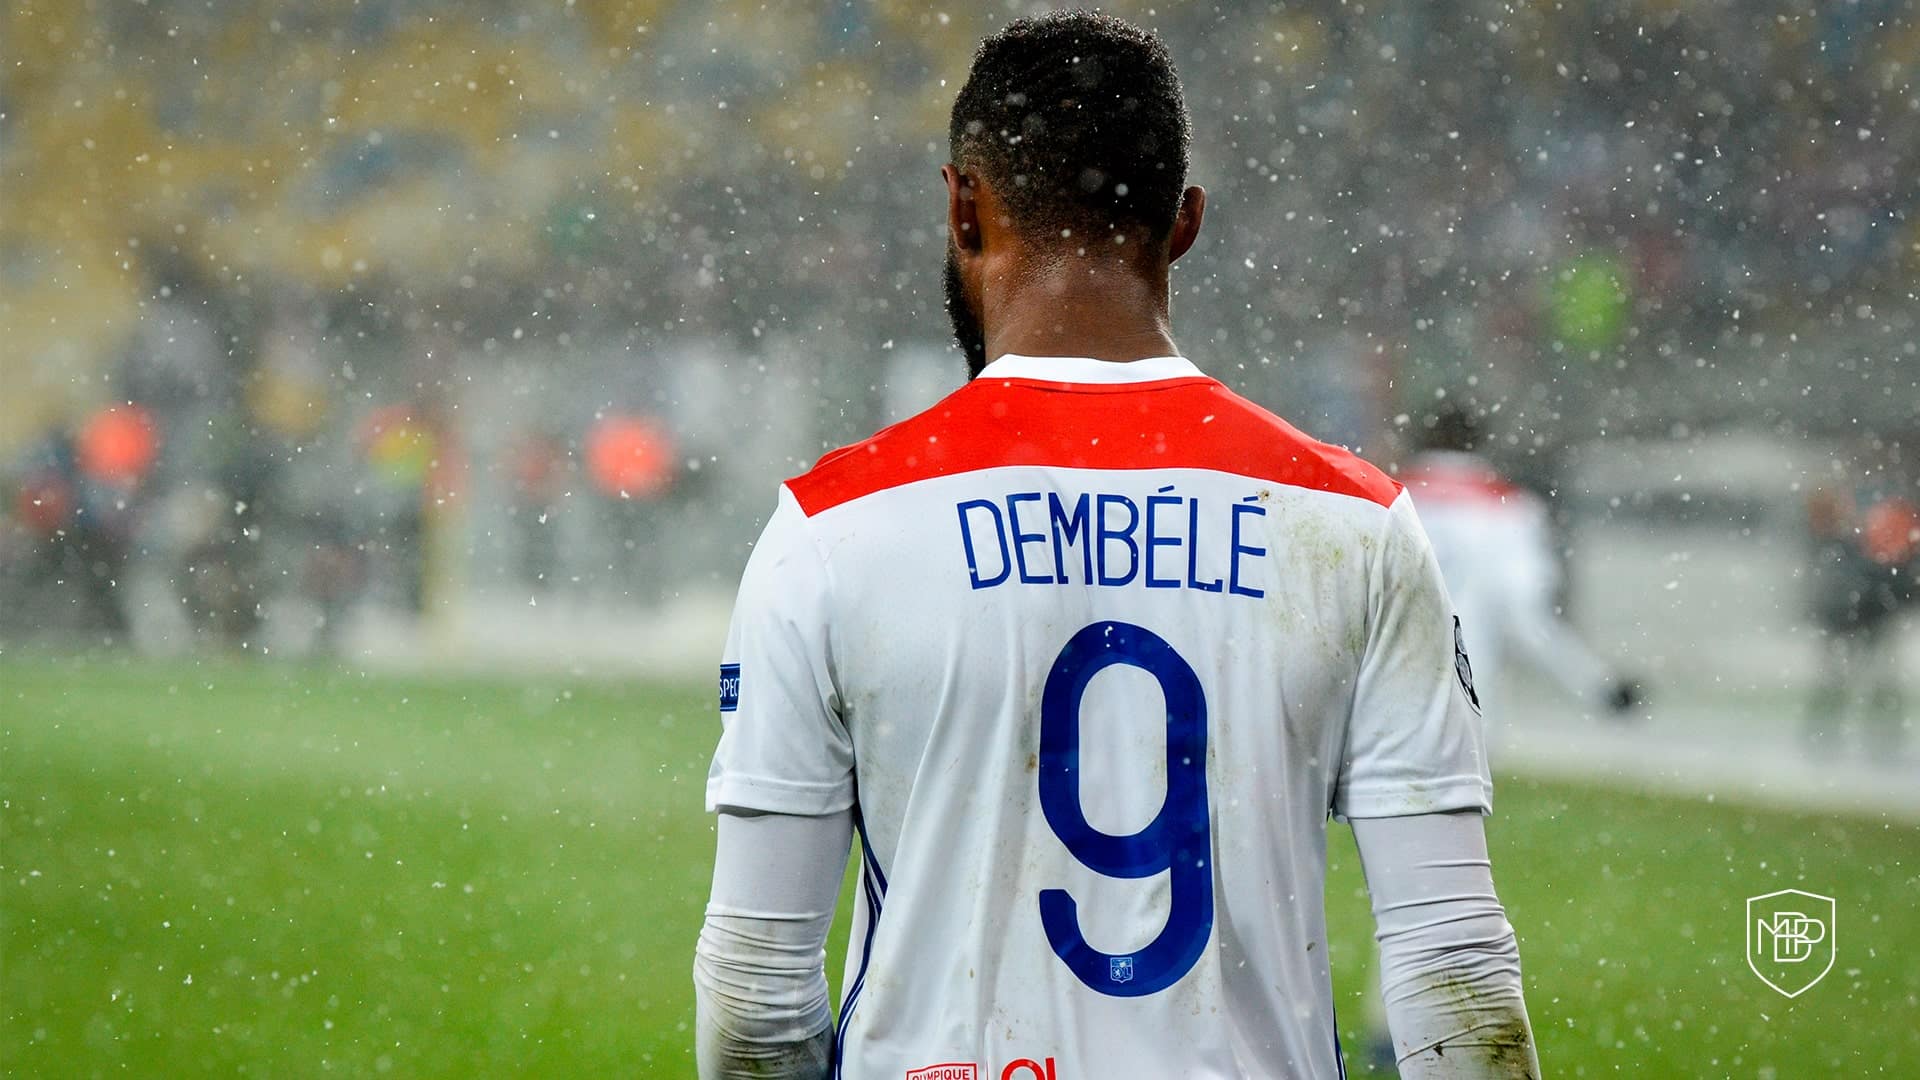 You are currently viewing MOUSSA DEMBÉLÉ: ANALYSIS OF ATLETICO DE MADRID’S NEW SIGNING